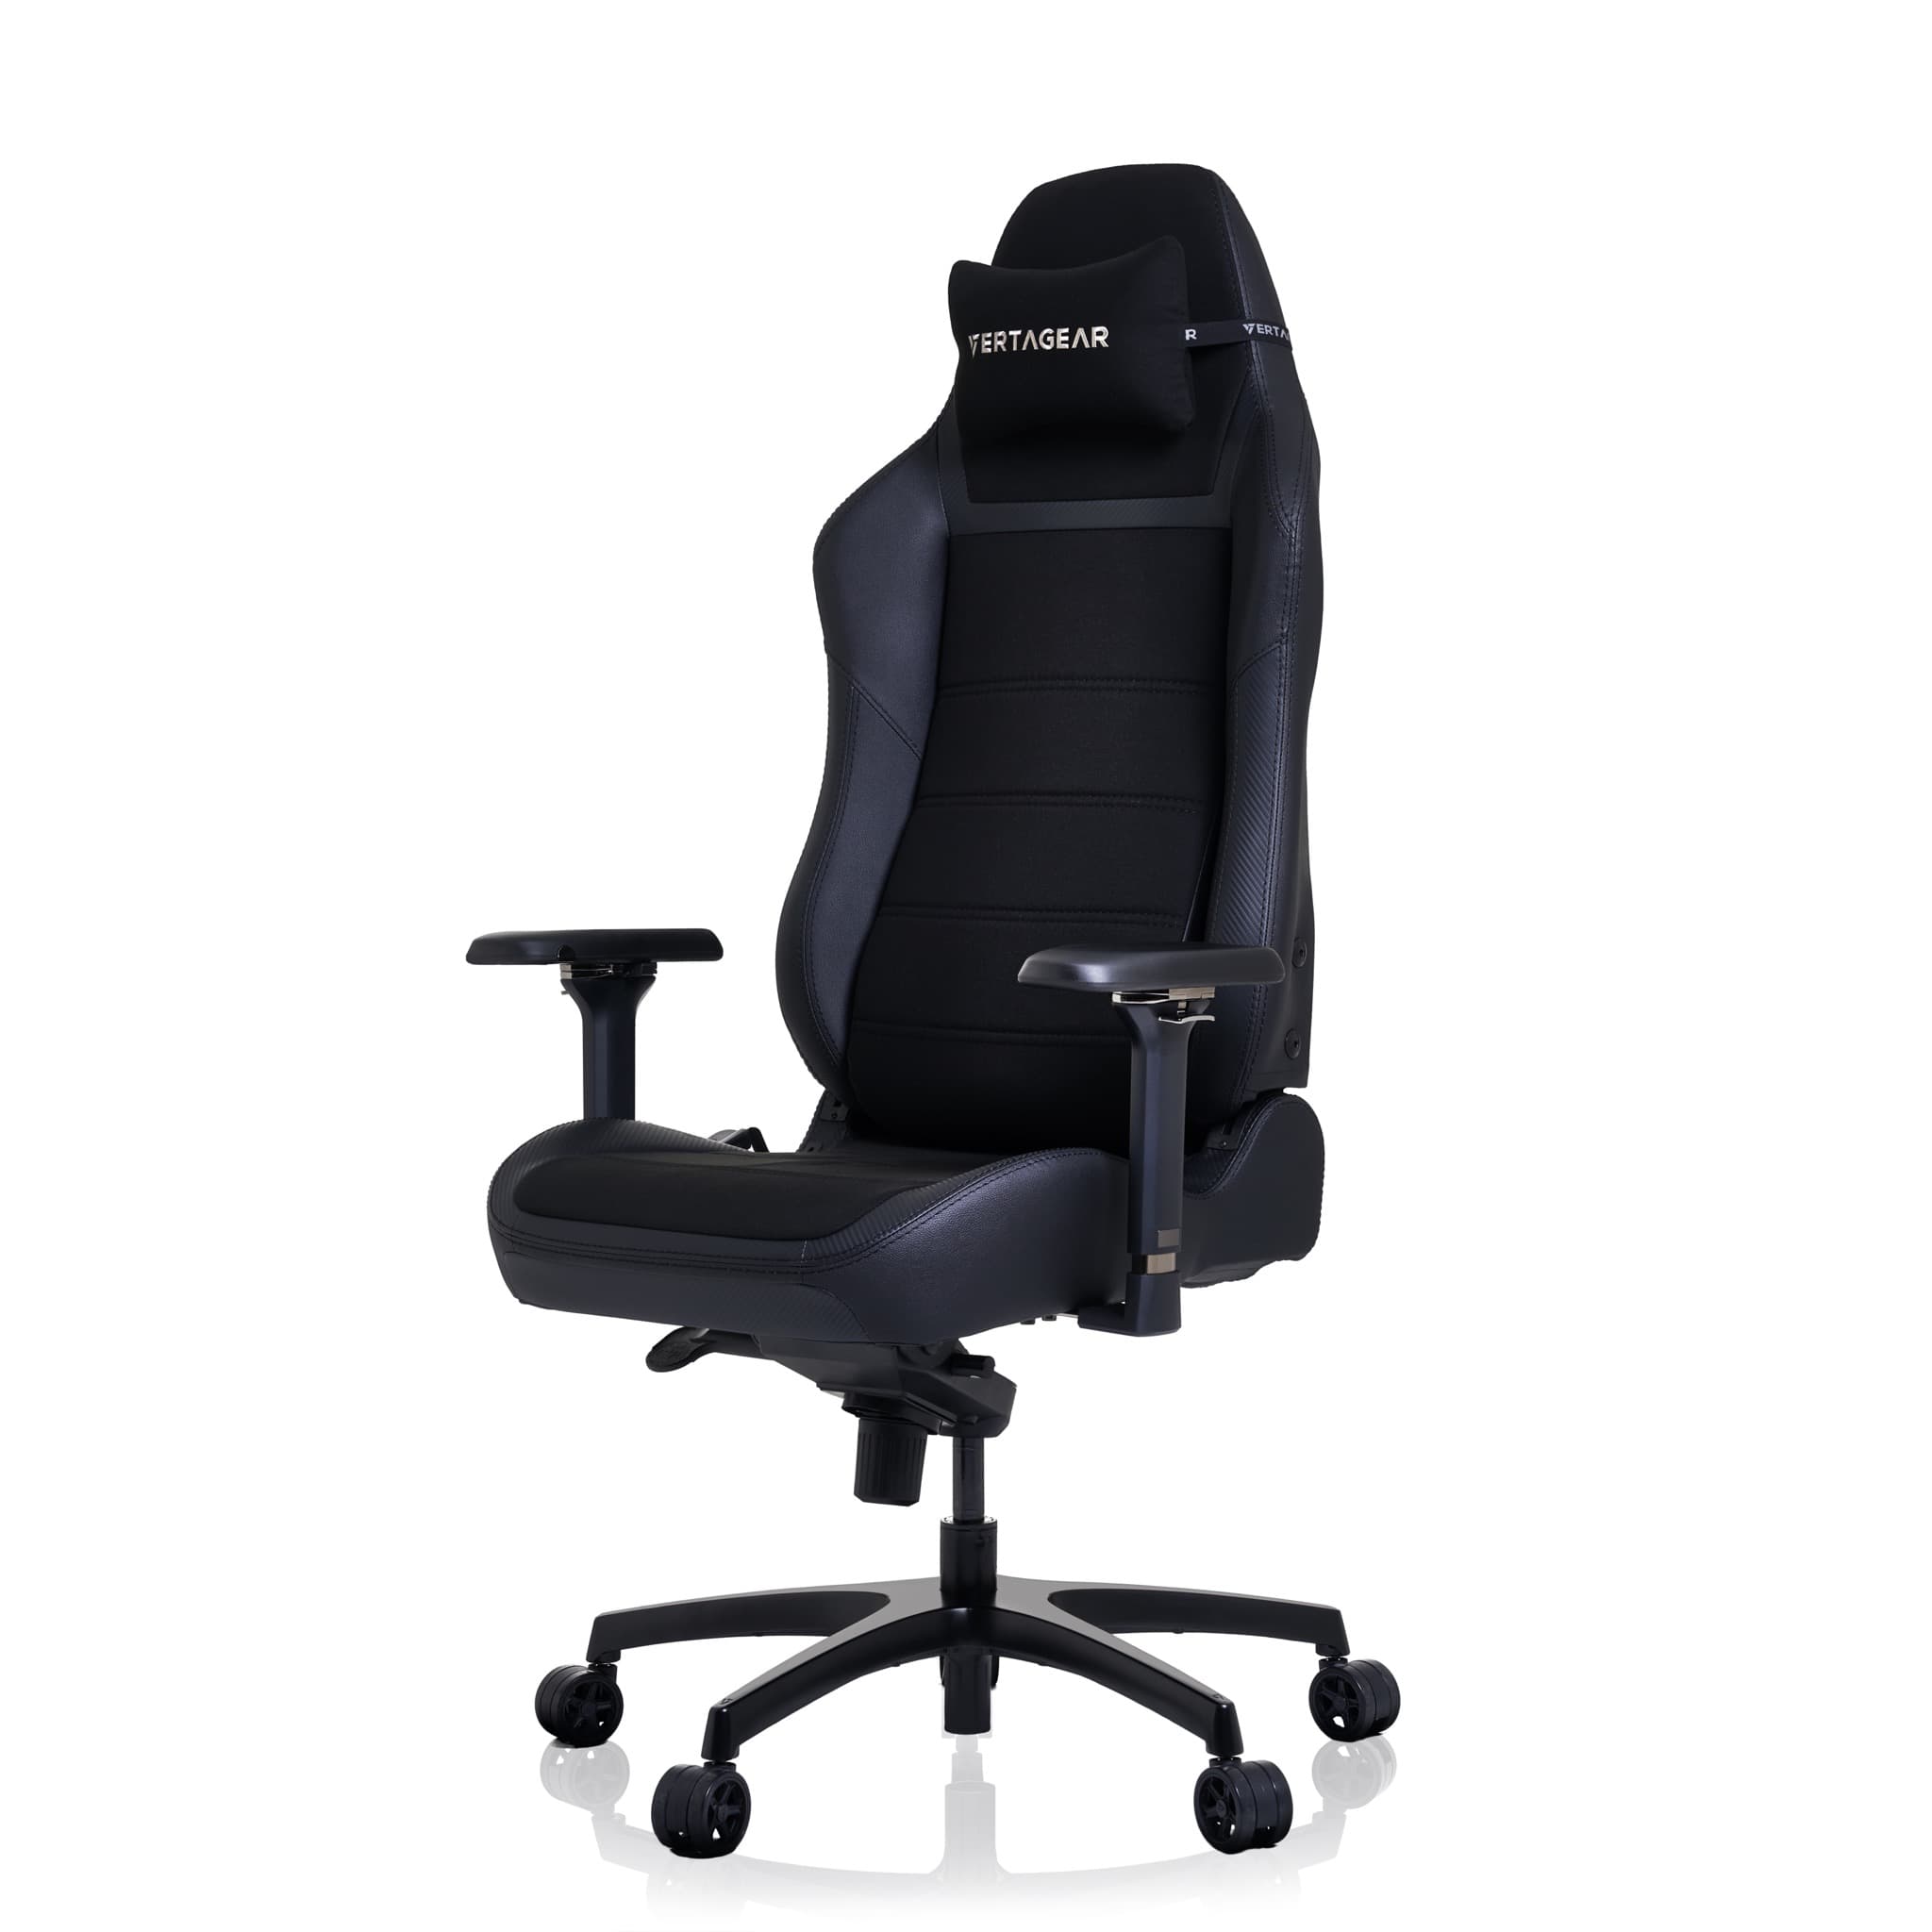 5 Premium XL Gaming Chairs With 400 lbs Support For Big Guys